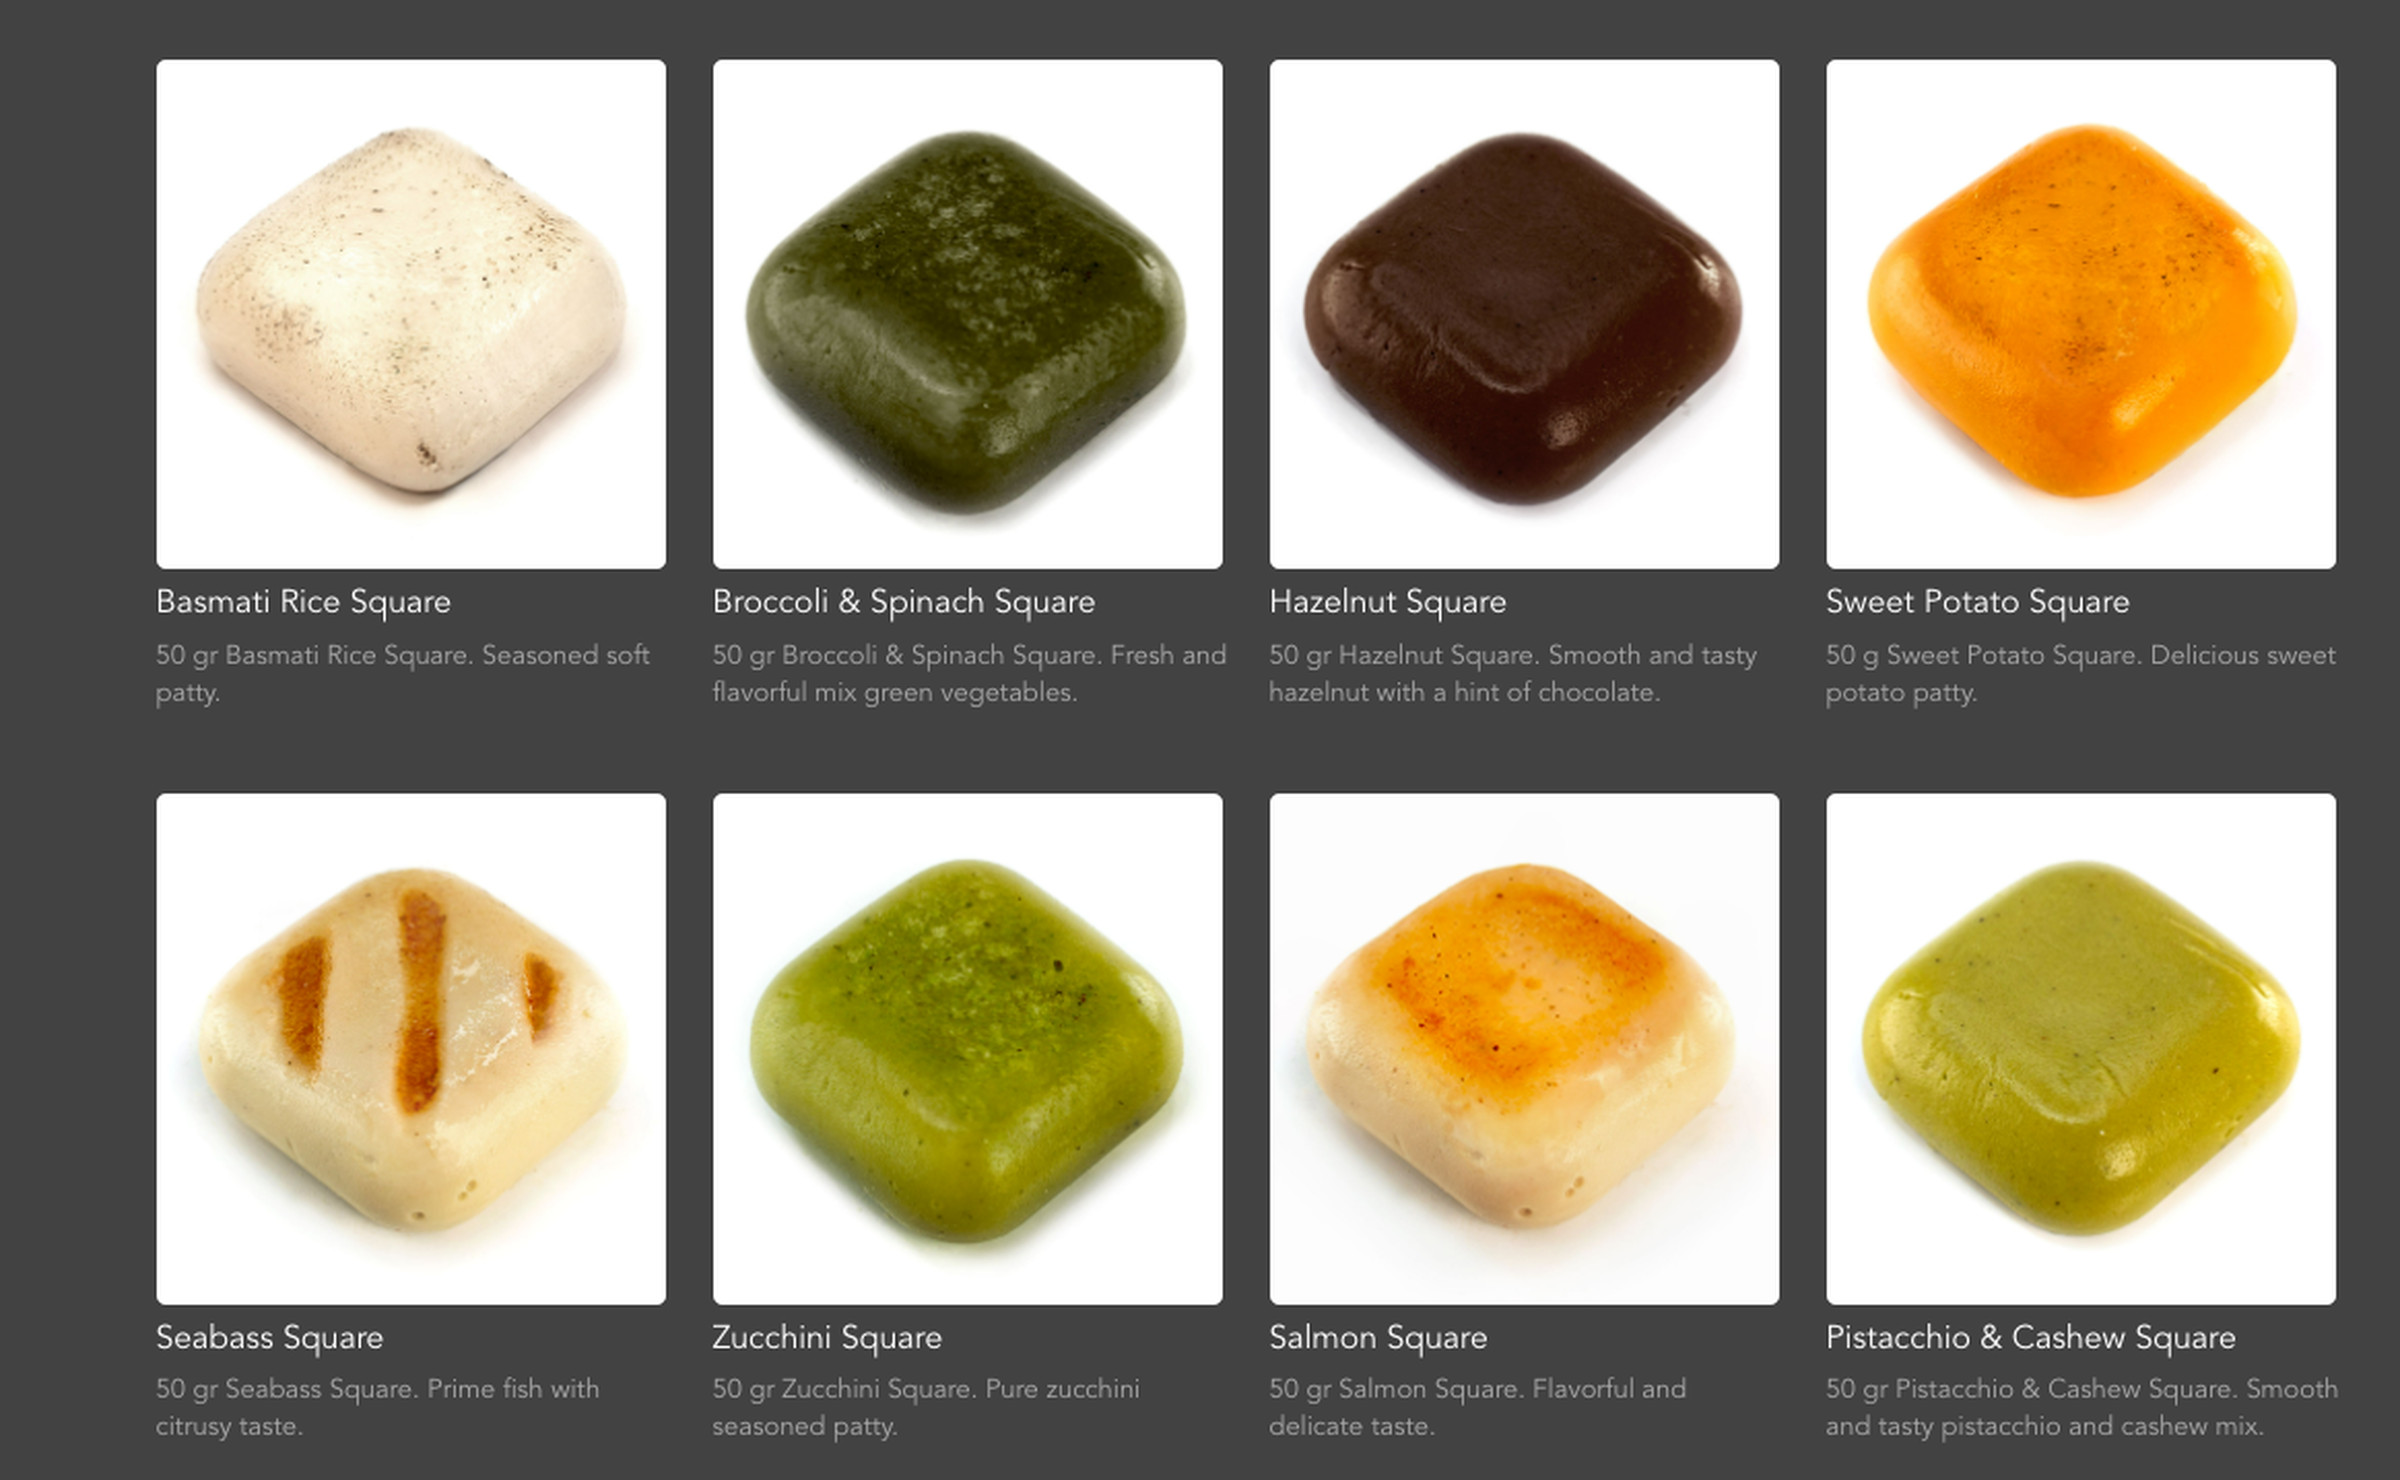 The squares come in a variety of flavors, both sweet and savory, each 50 grams in size. 